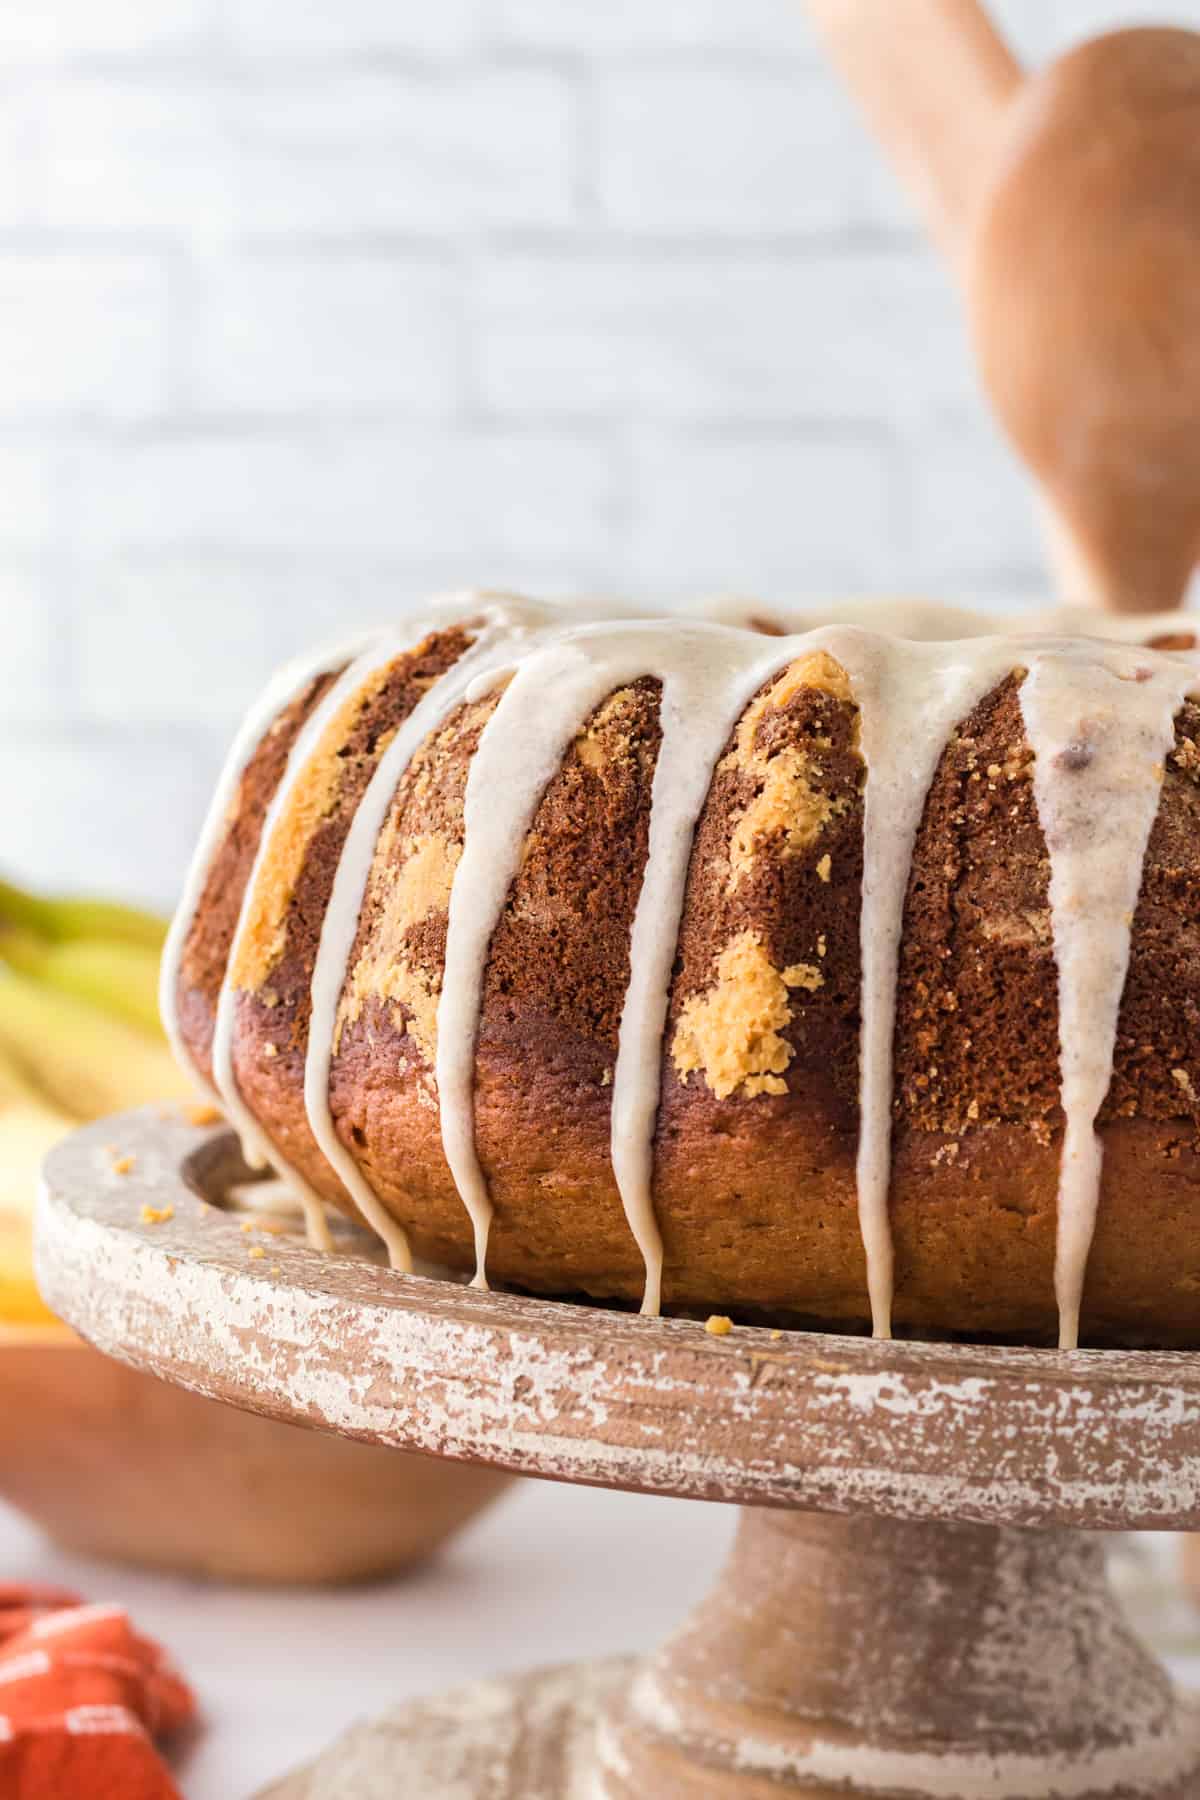 Golden brown banana bundt cake with brown sugar glaze dripping down the sides